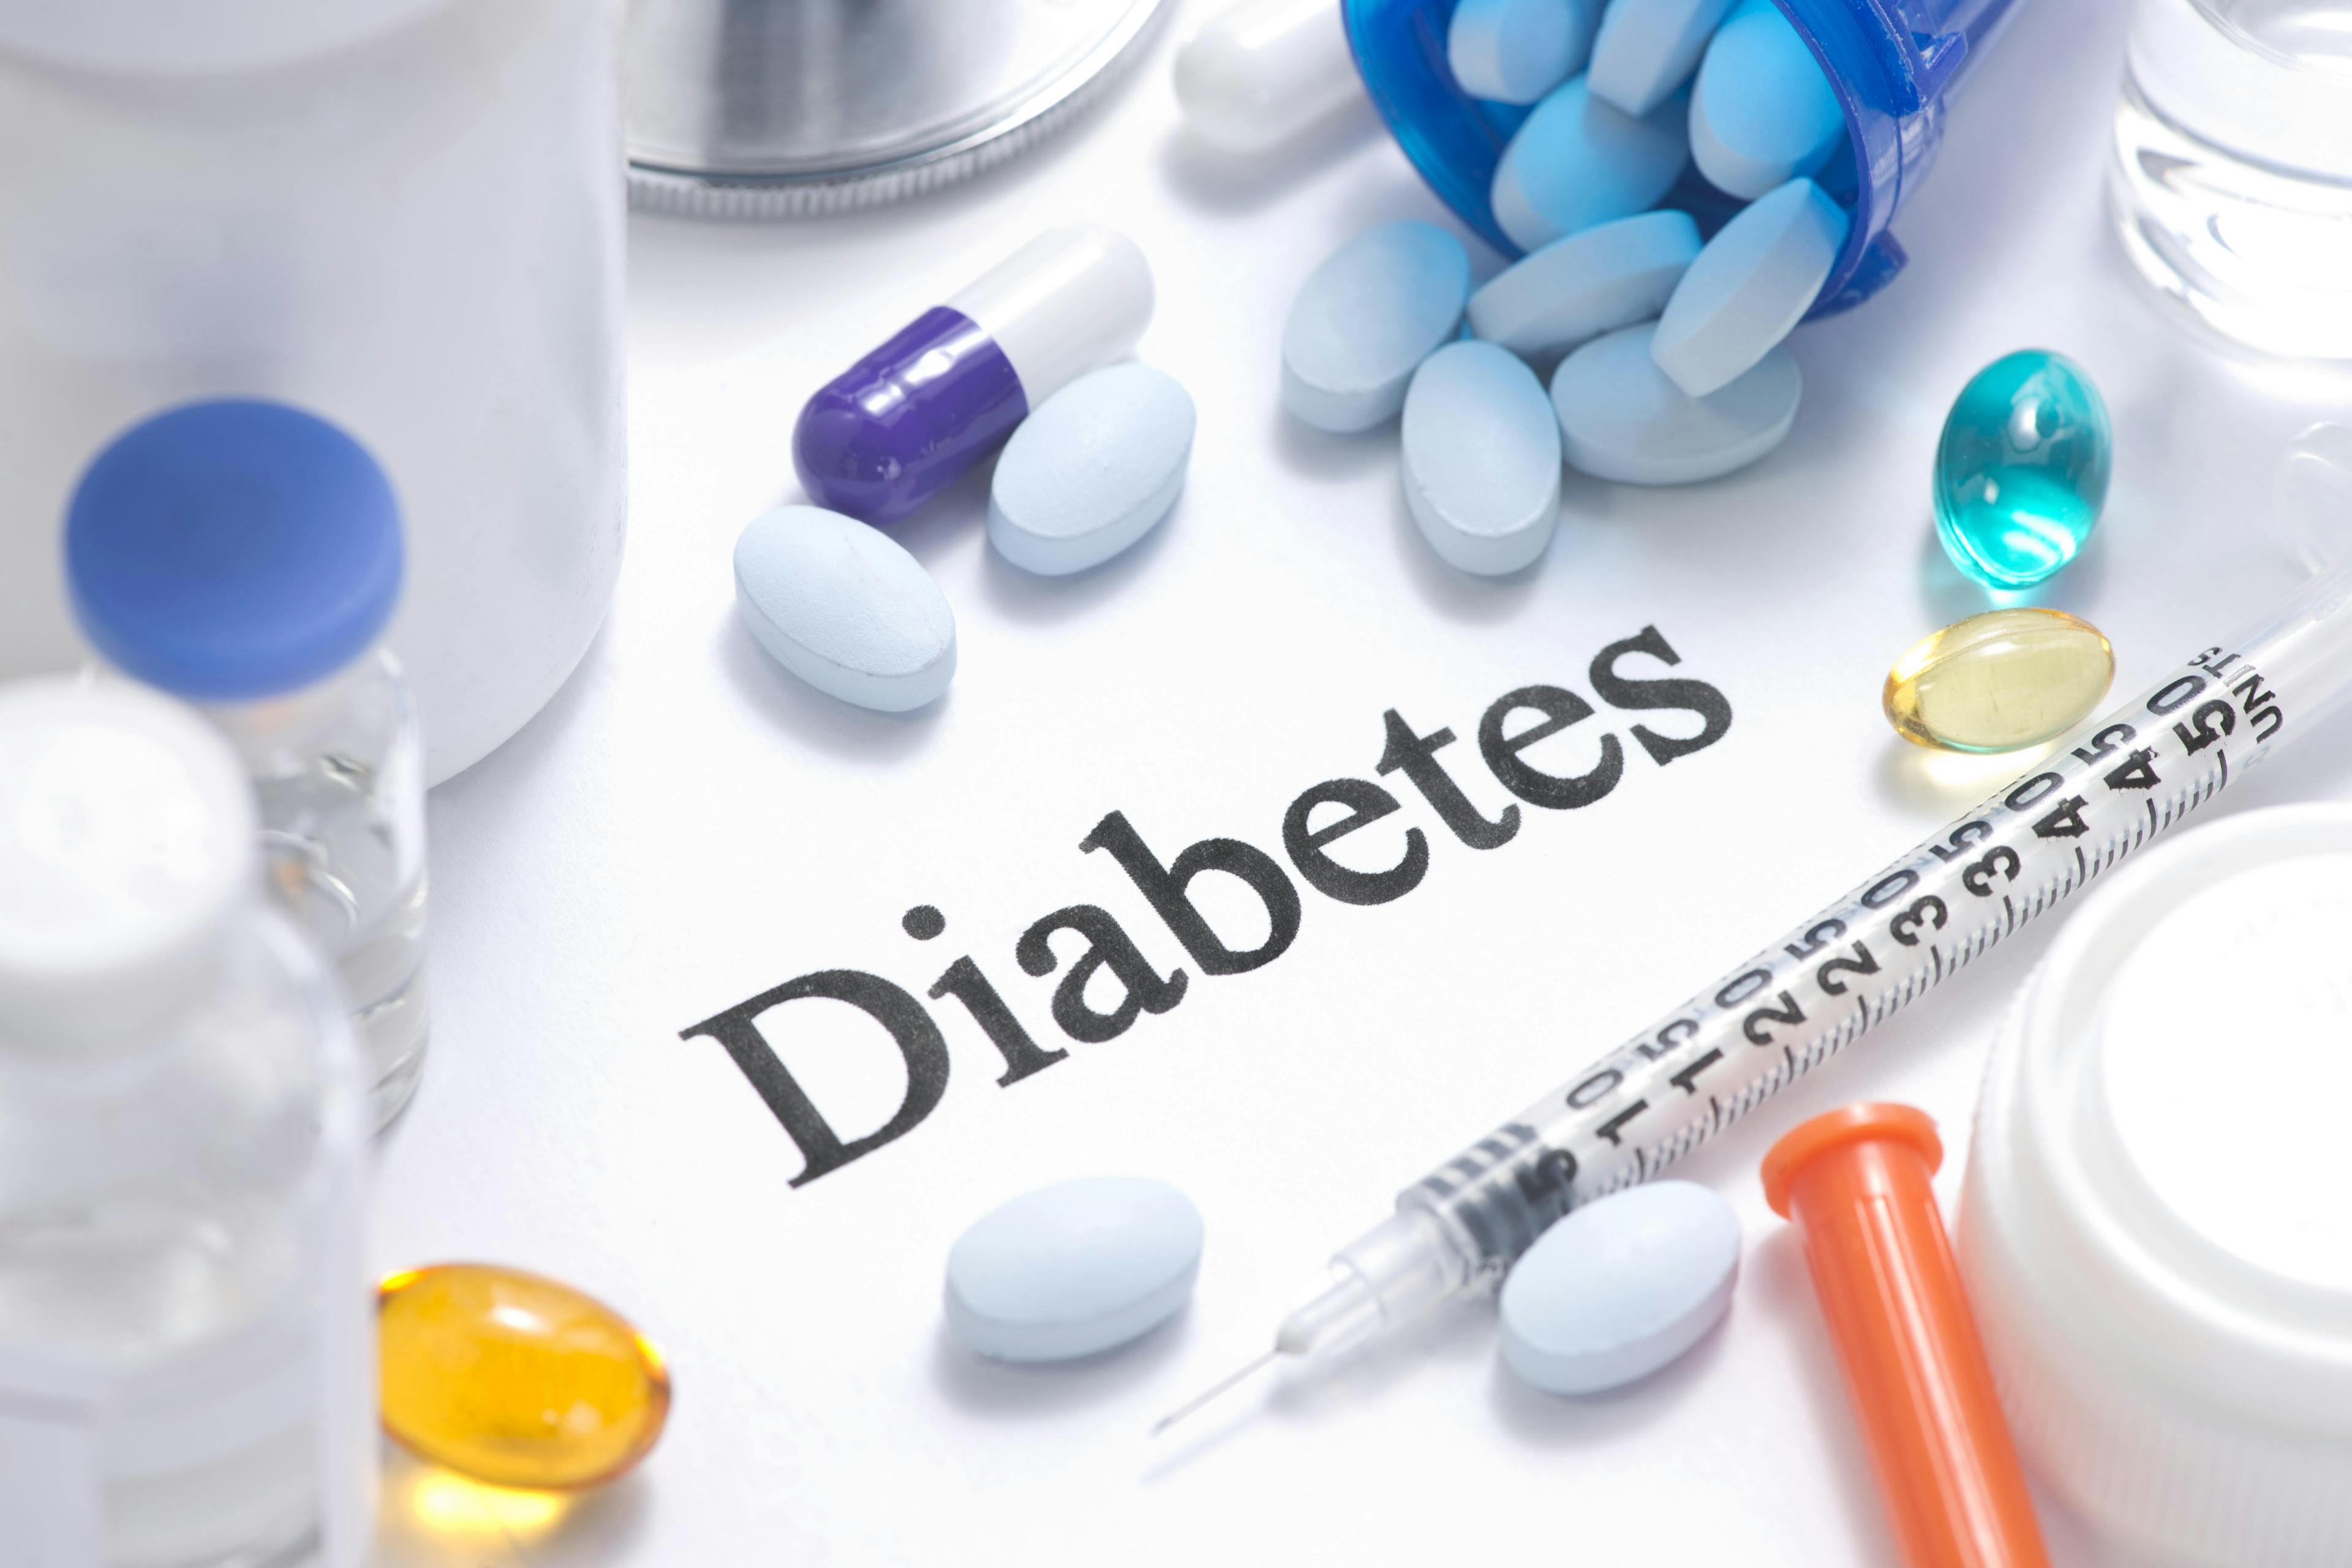 Diabetes and cardiovascular medications.